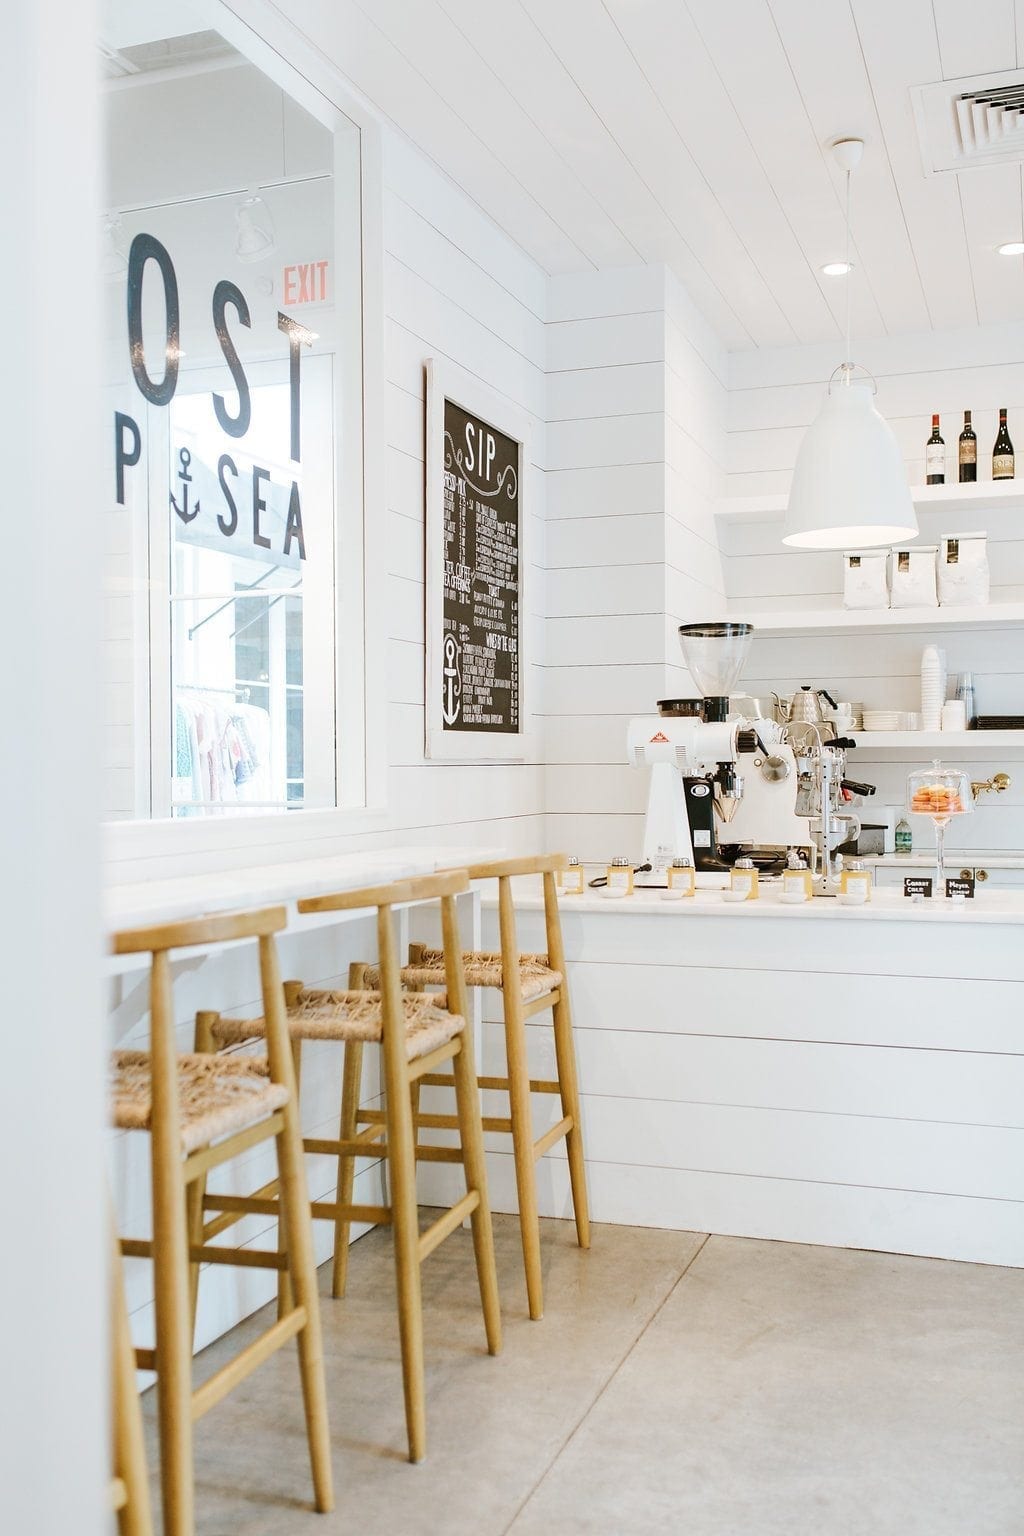 The Outpost Coffee Shop in Rosemary Beach. All white shiplap design coffee shop. This bright and happy coffee shop has character and fun. I love the design of the white bar counter and all white shelving with white lighting.